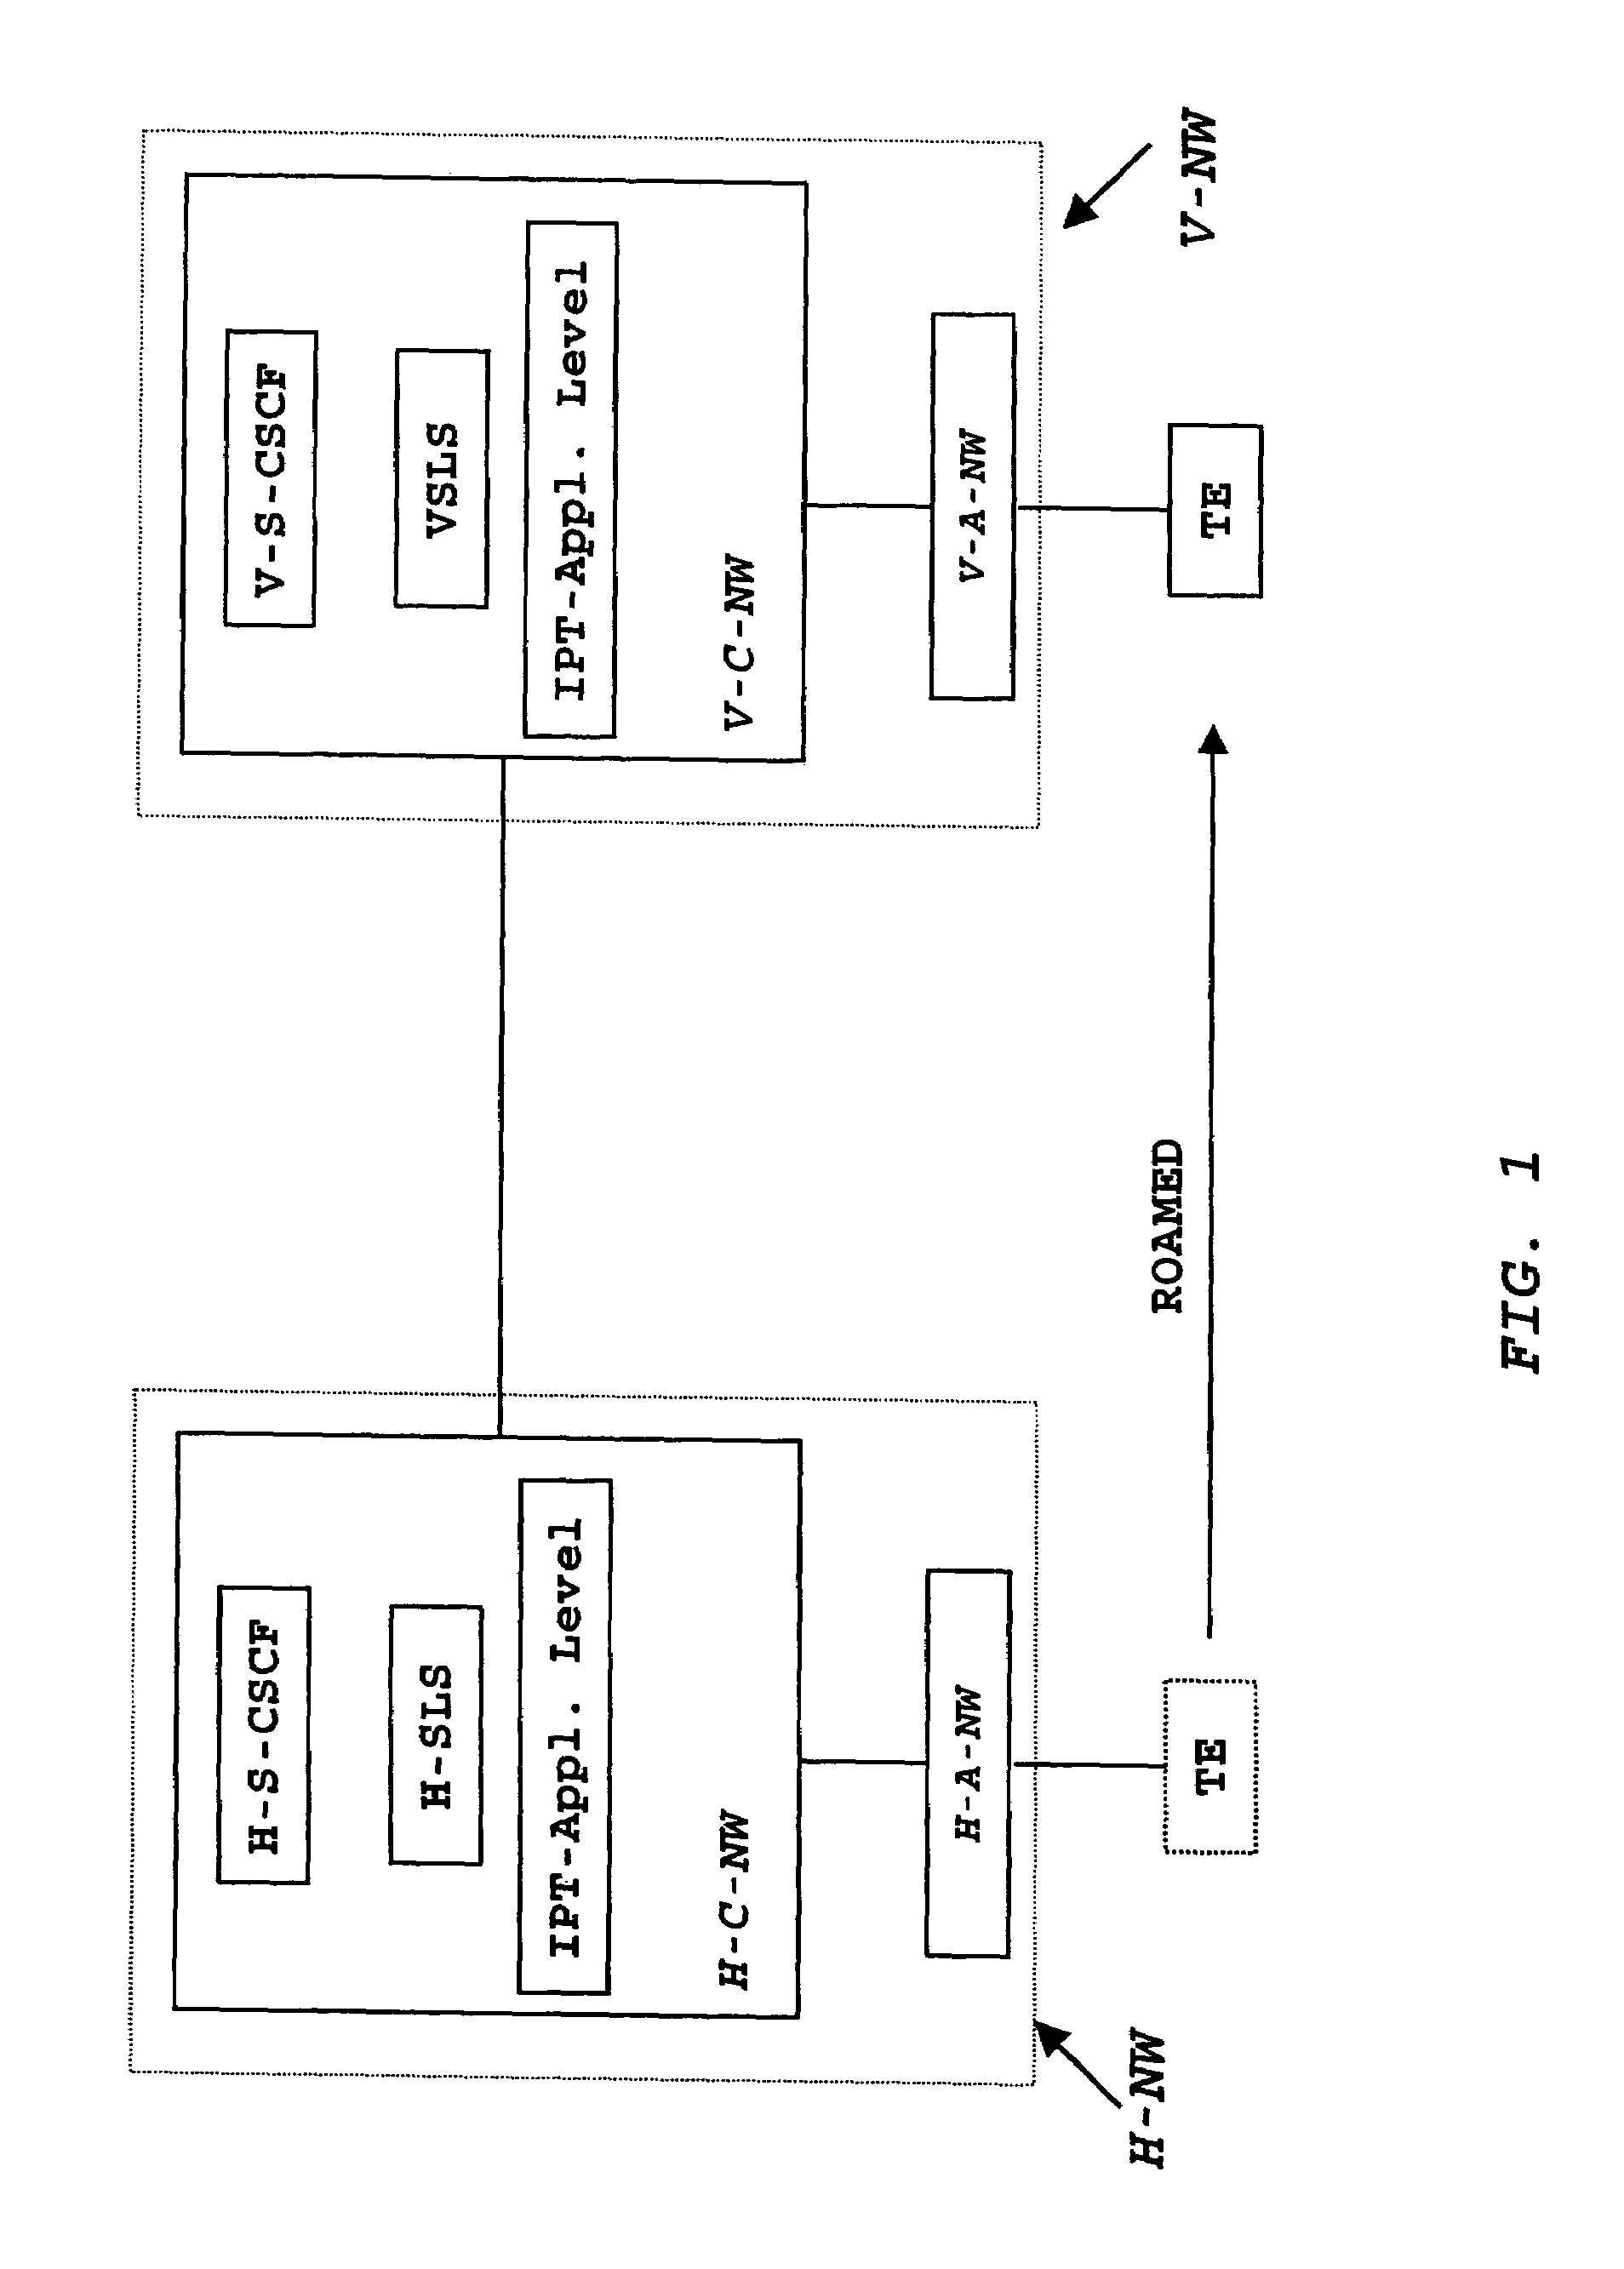 Service discovery and service partitioning for a subscriber terminal between different networks